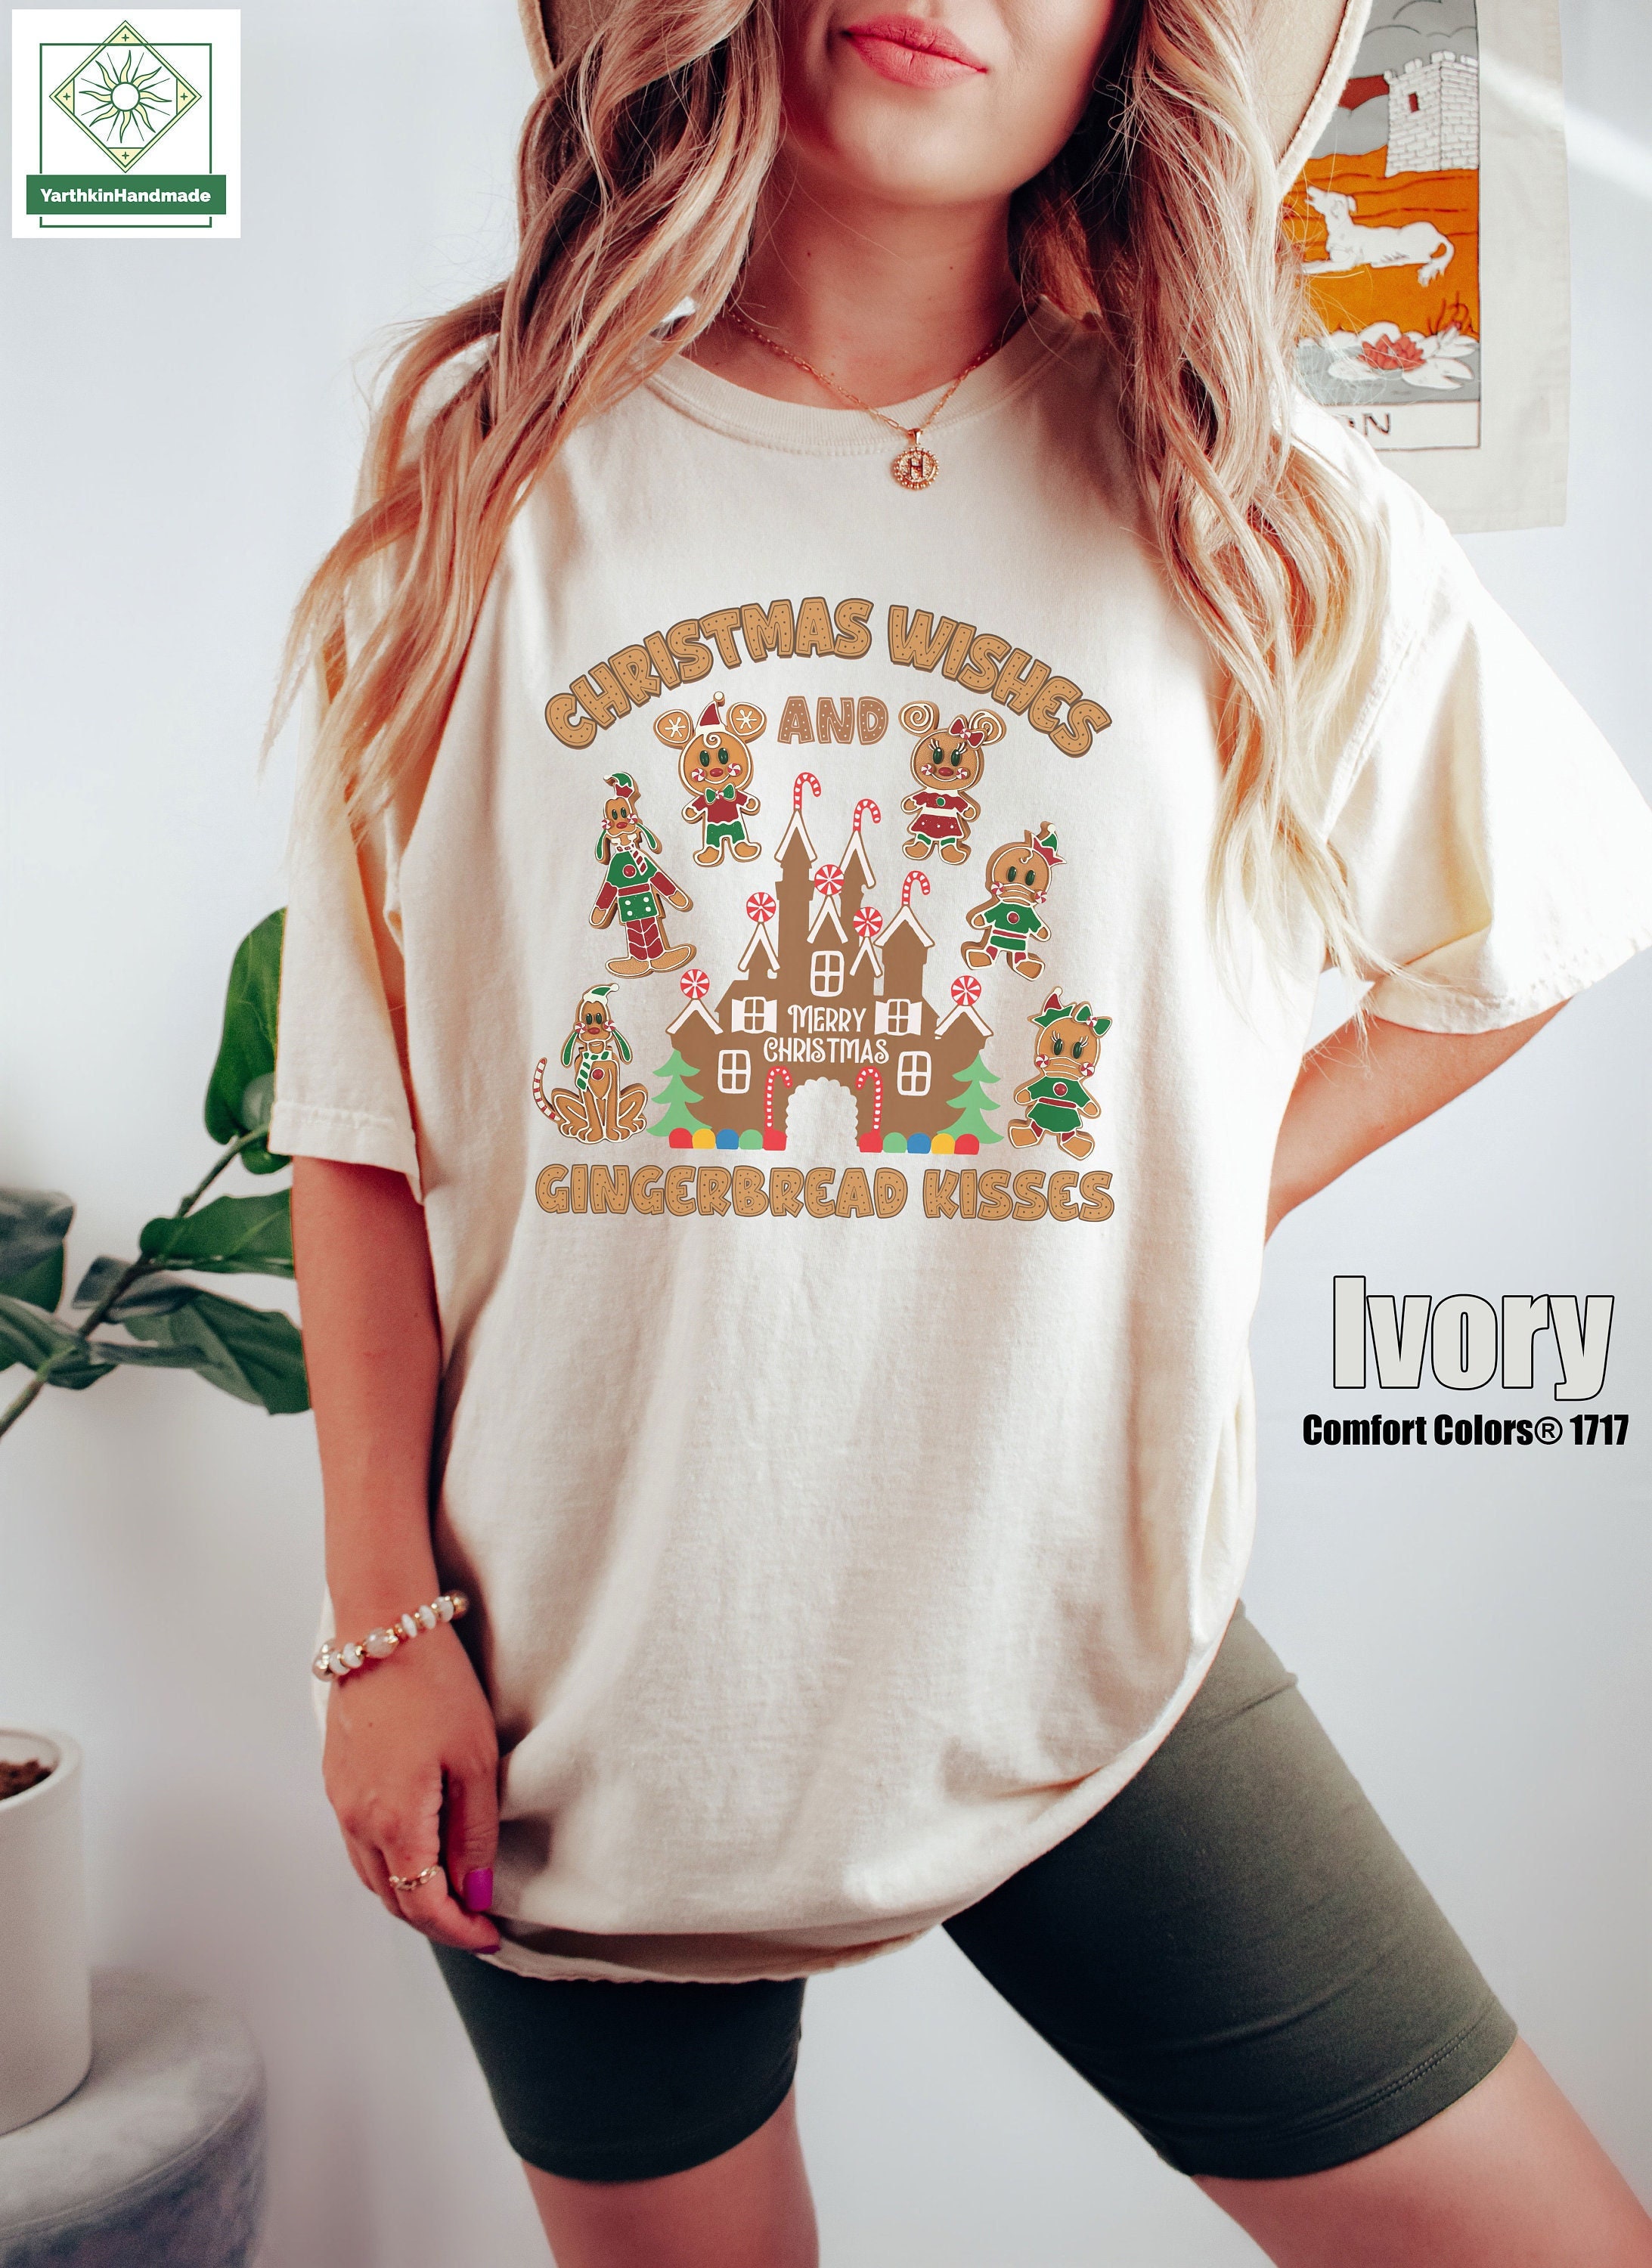 Discover Retro Christmas Wishes and Gingerbread Kisses Shirt, Disney Christmas Cookies Shirt